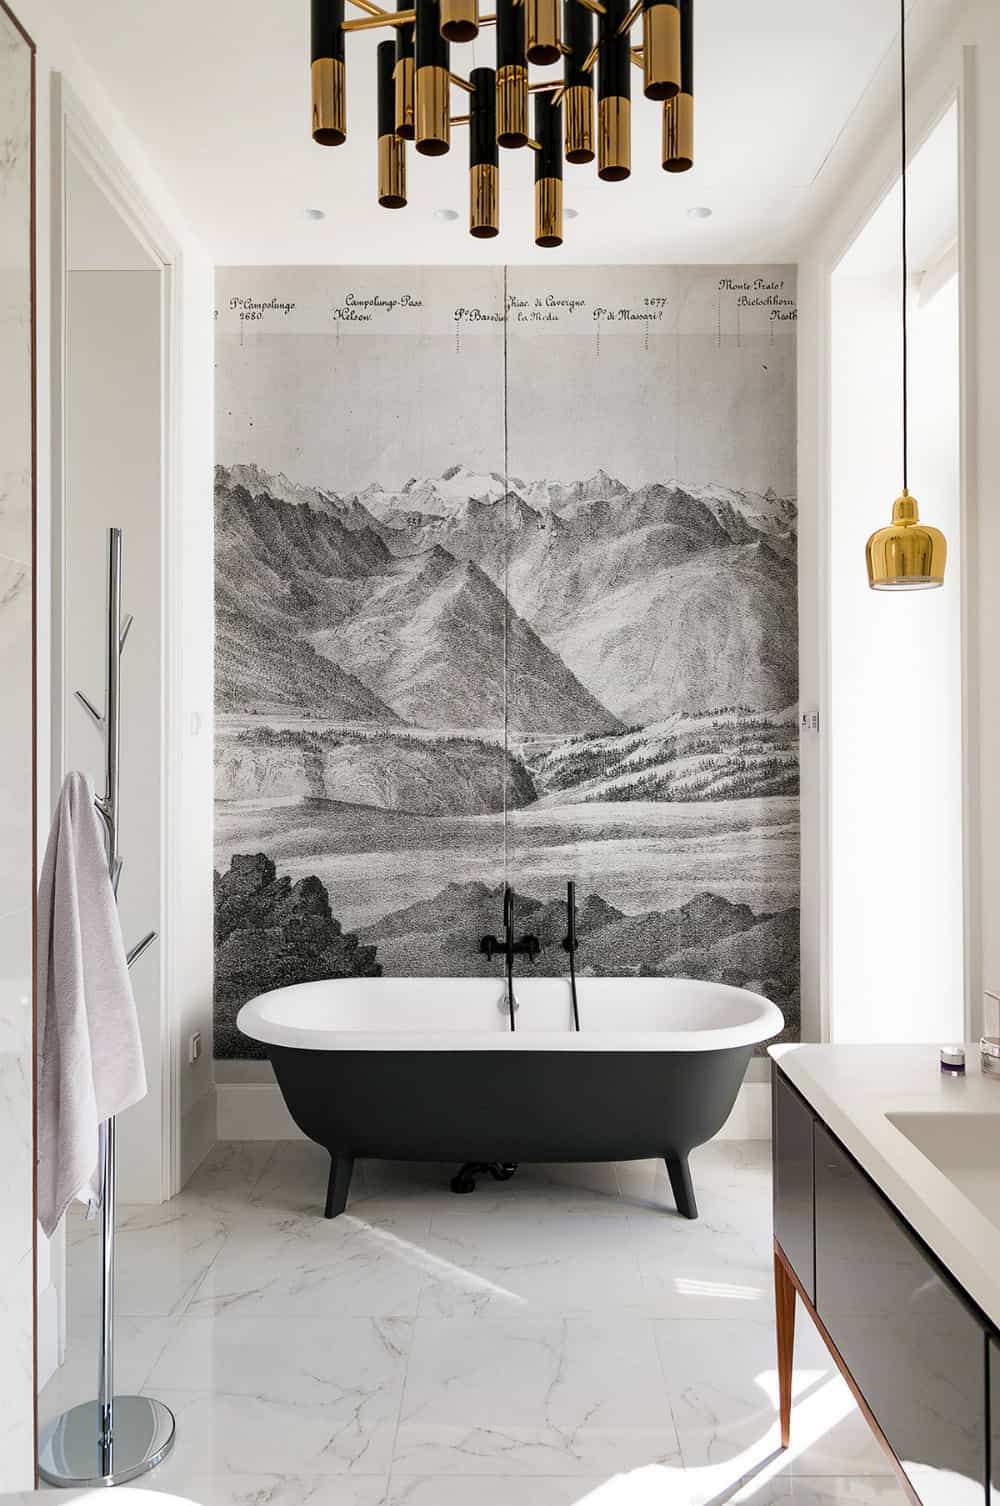 Bathroom feature wall takes the creativity prize